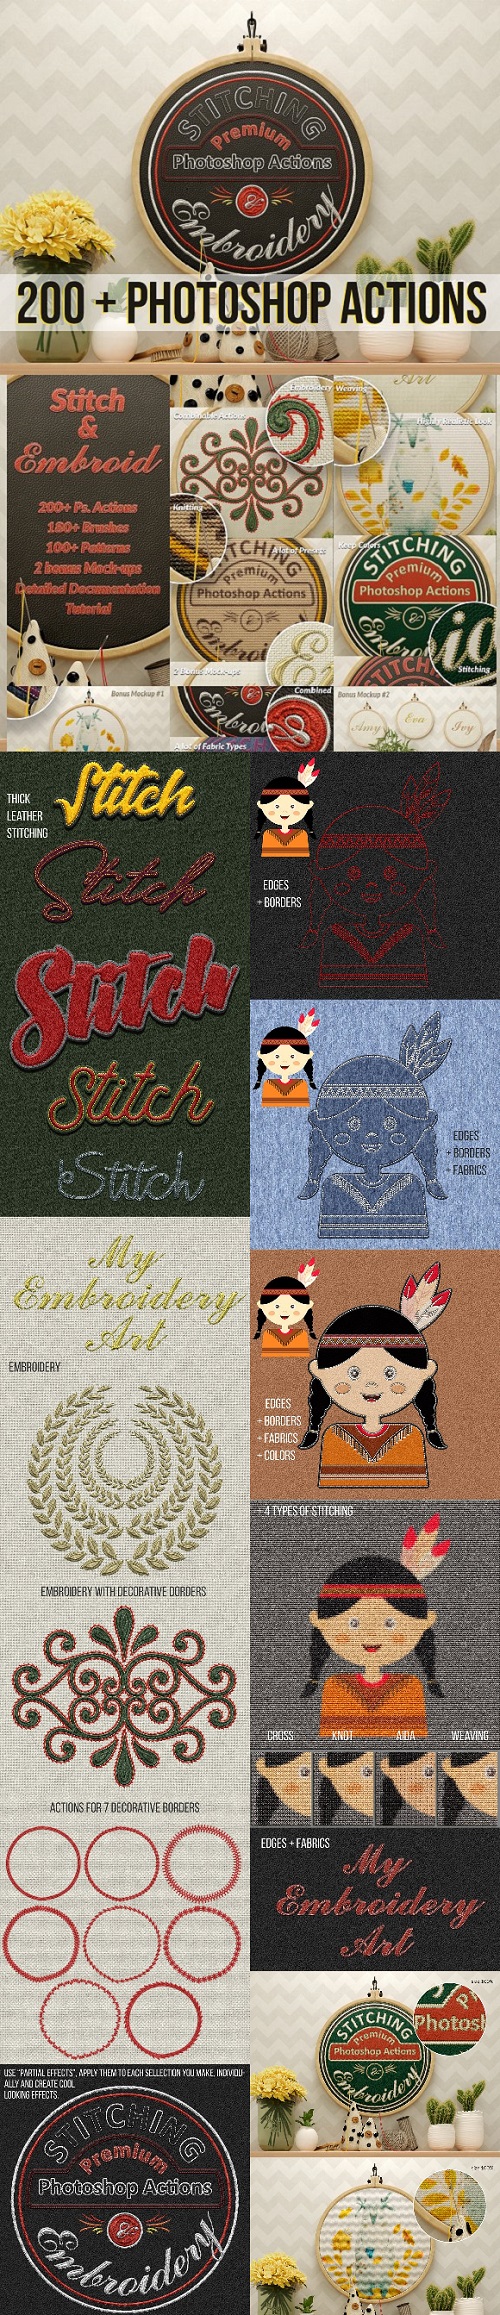 Stitch And Embroid Titan Action Pack - 2294950